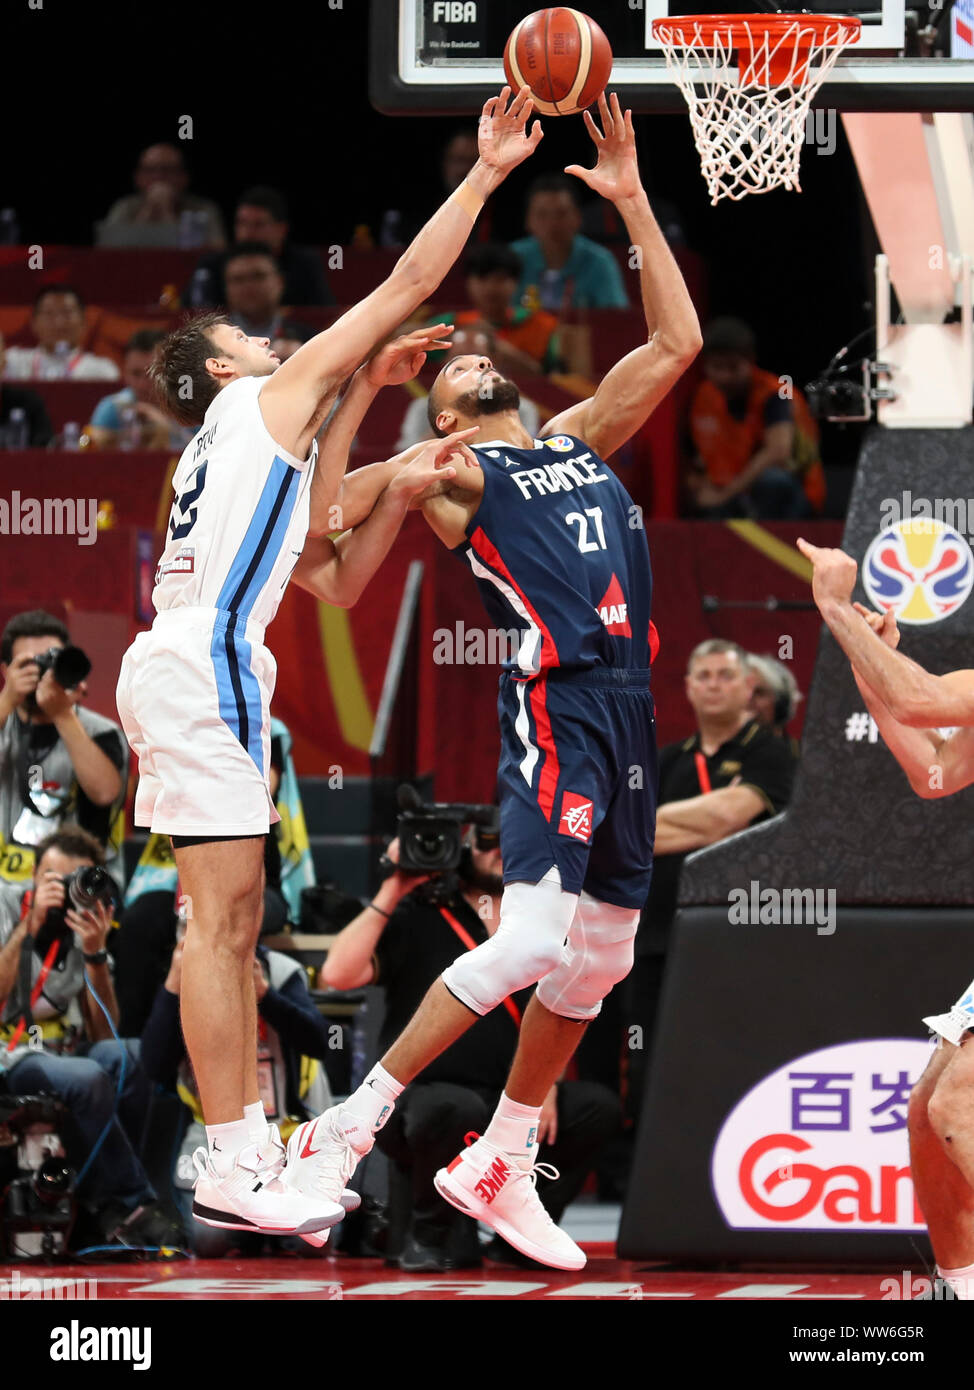 Beijing, China. 13th Sep, 2019. Rudy Gobert (R) of France vies for the ball during the semifinal match between Argentina and France at the 2019 FIBA World Cup in Beijing, capital of China, Sept. 13, 2019. Credit: Meng Yongmin/Xinhua/Alamy Live News Stock Photo